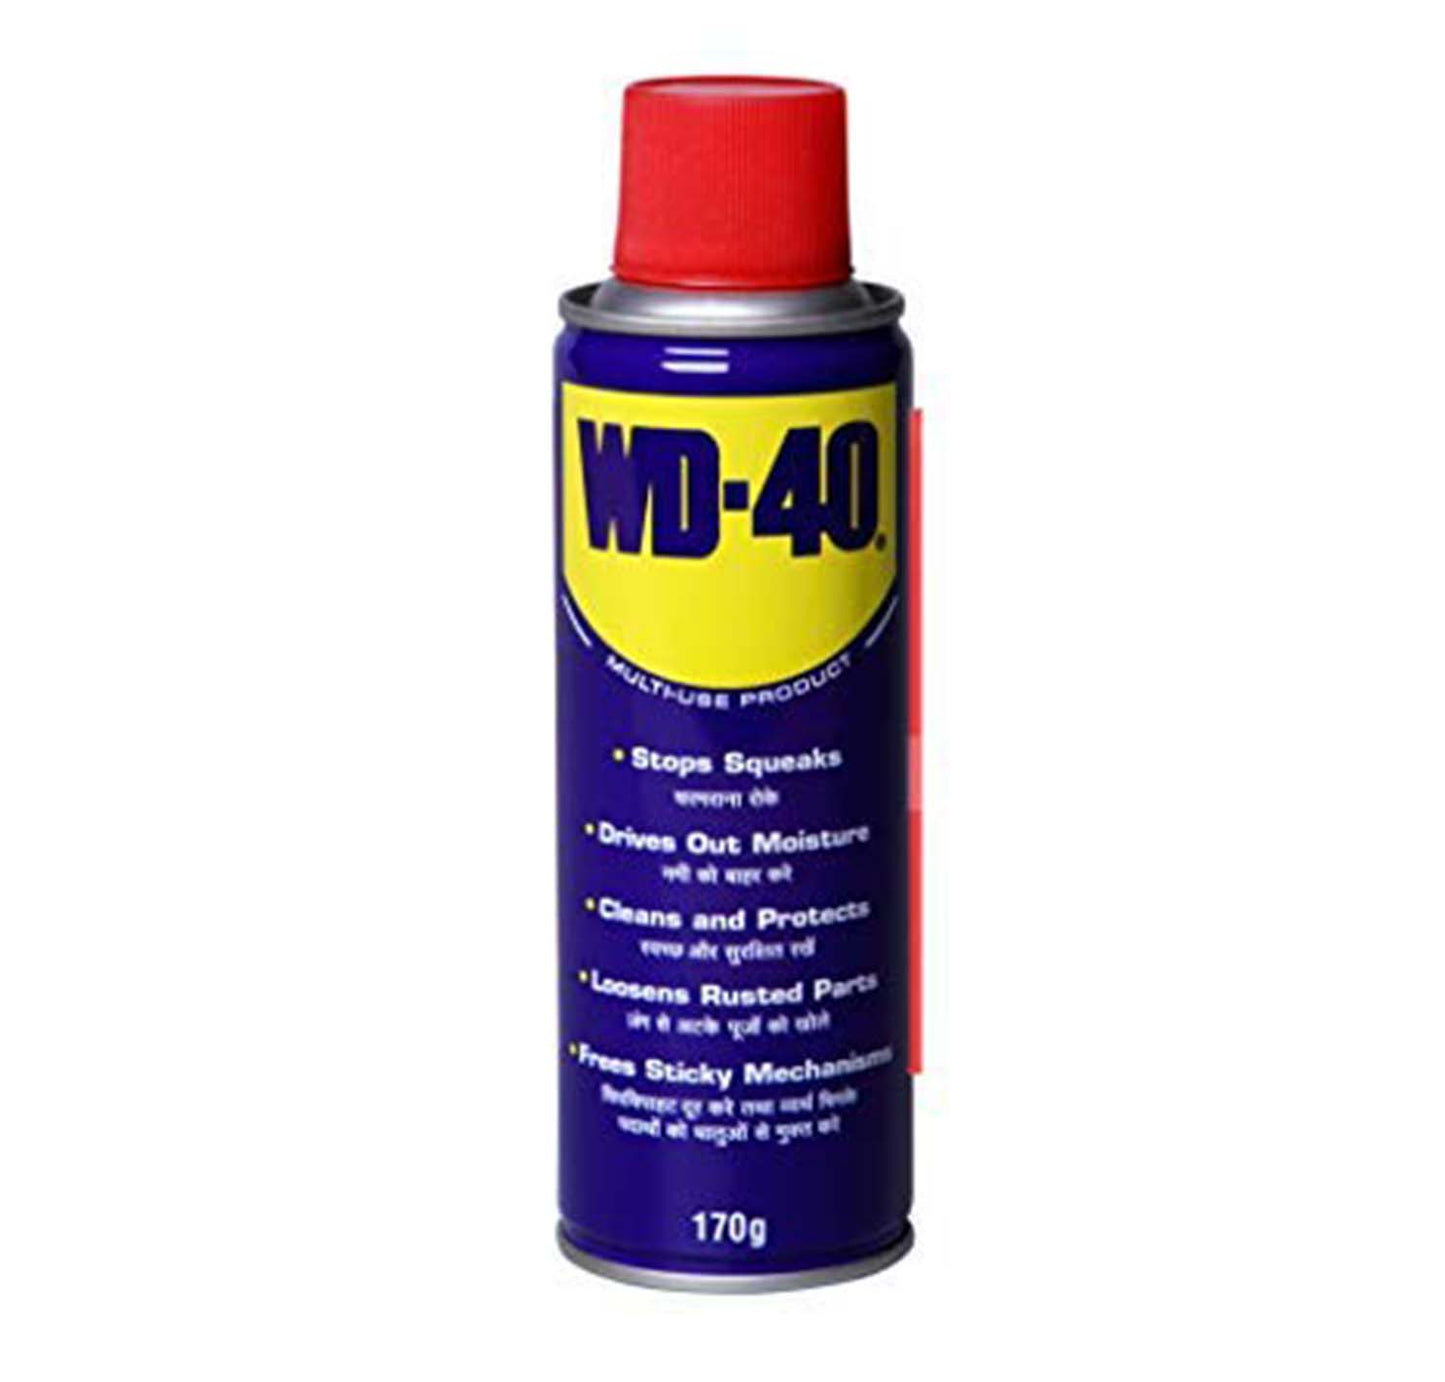 WD-40 Multi-use Lubricant / Rust Removal